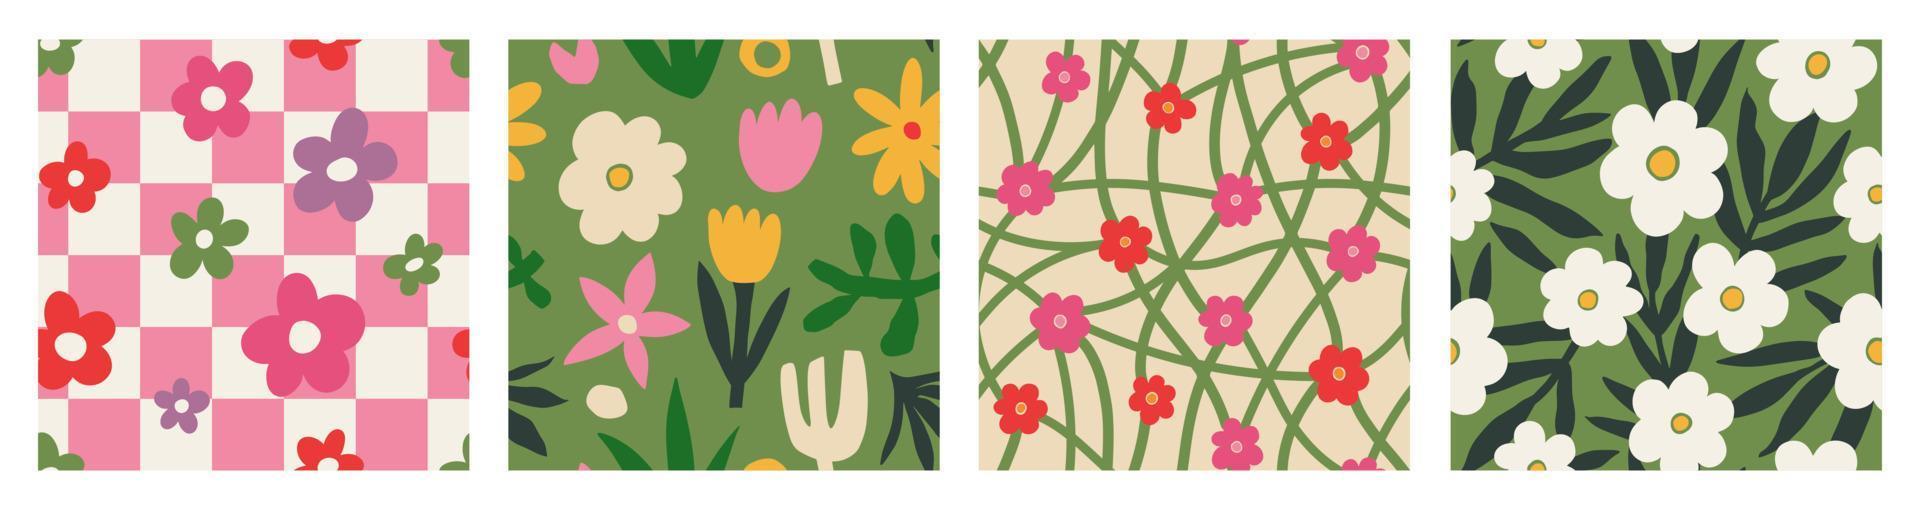 Set Aesthetic Contemporary printable seamless pattern with retro groovy flowers. Decorative Naive 60's, 70's style Vintage boho background in minimalist mid century style for fabric, wallpaper vector